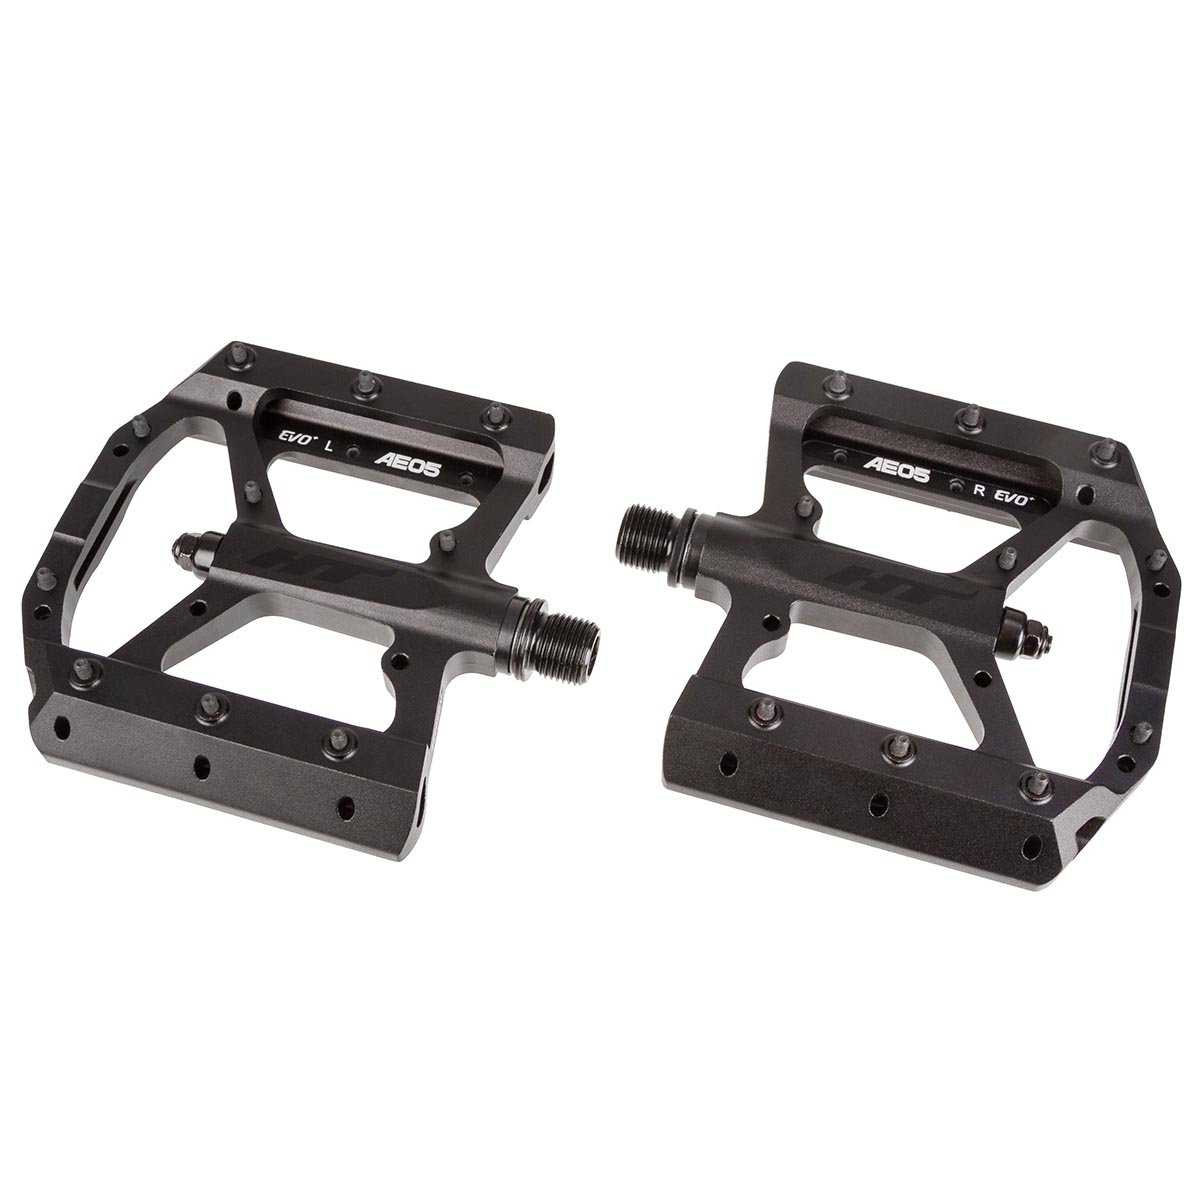 HT Components Pedals AE05 Stealth Black